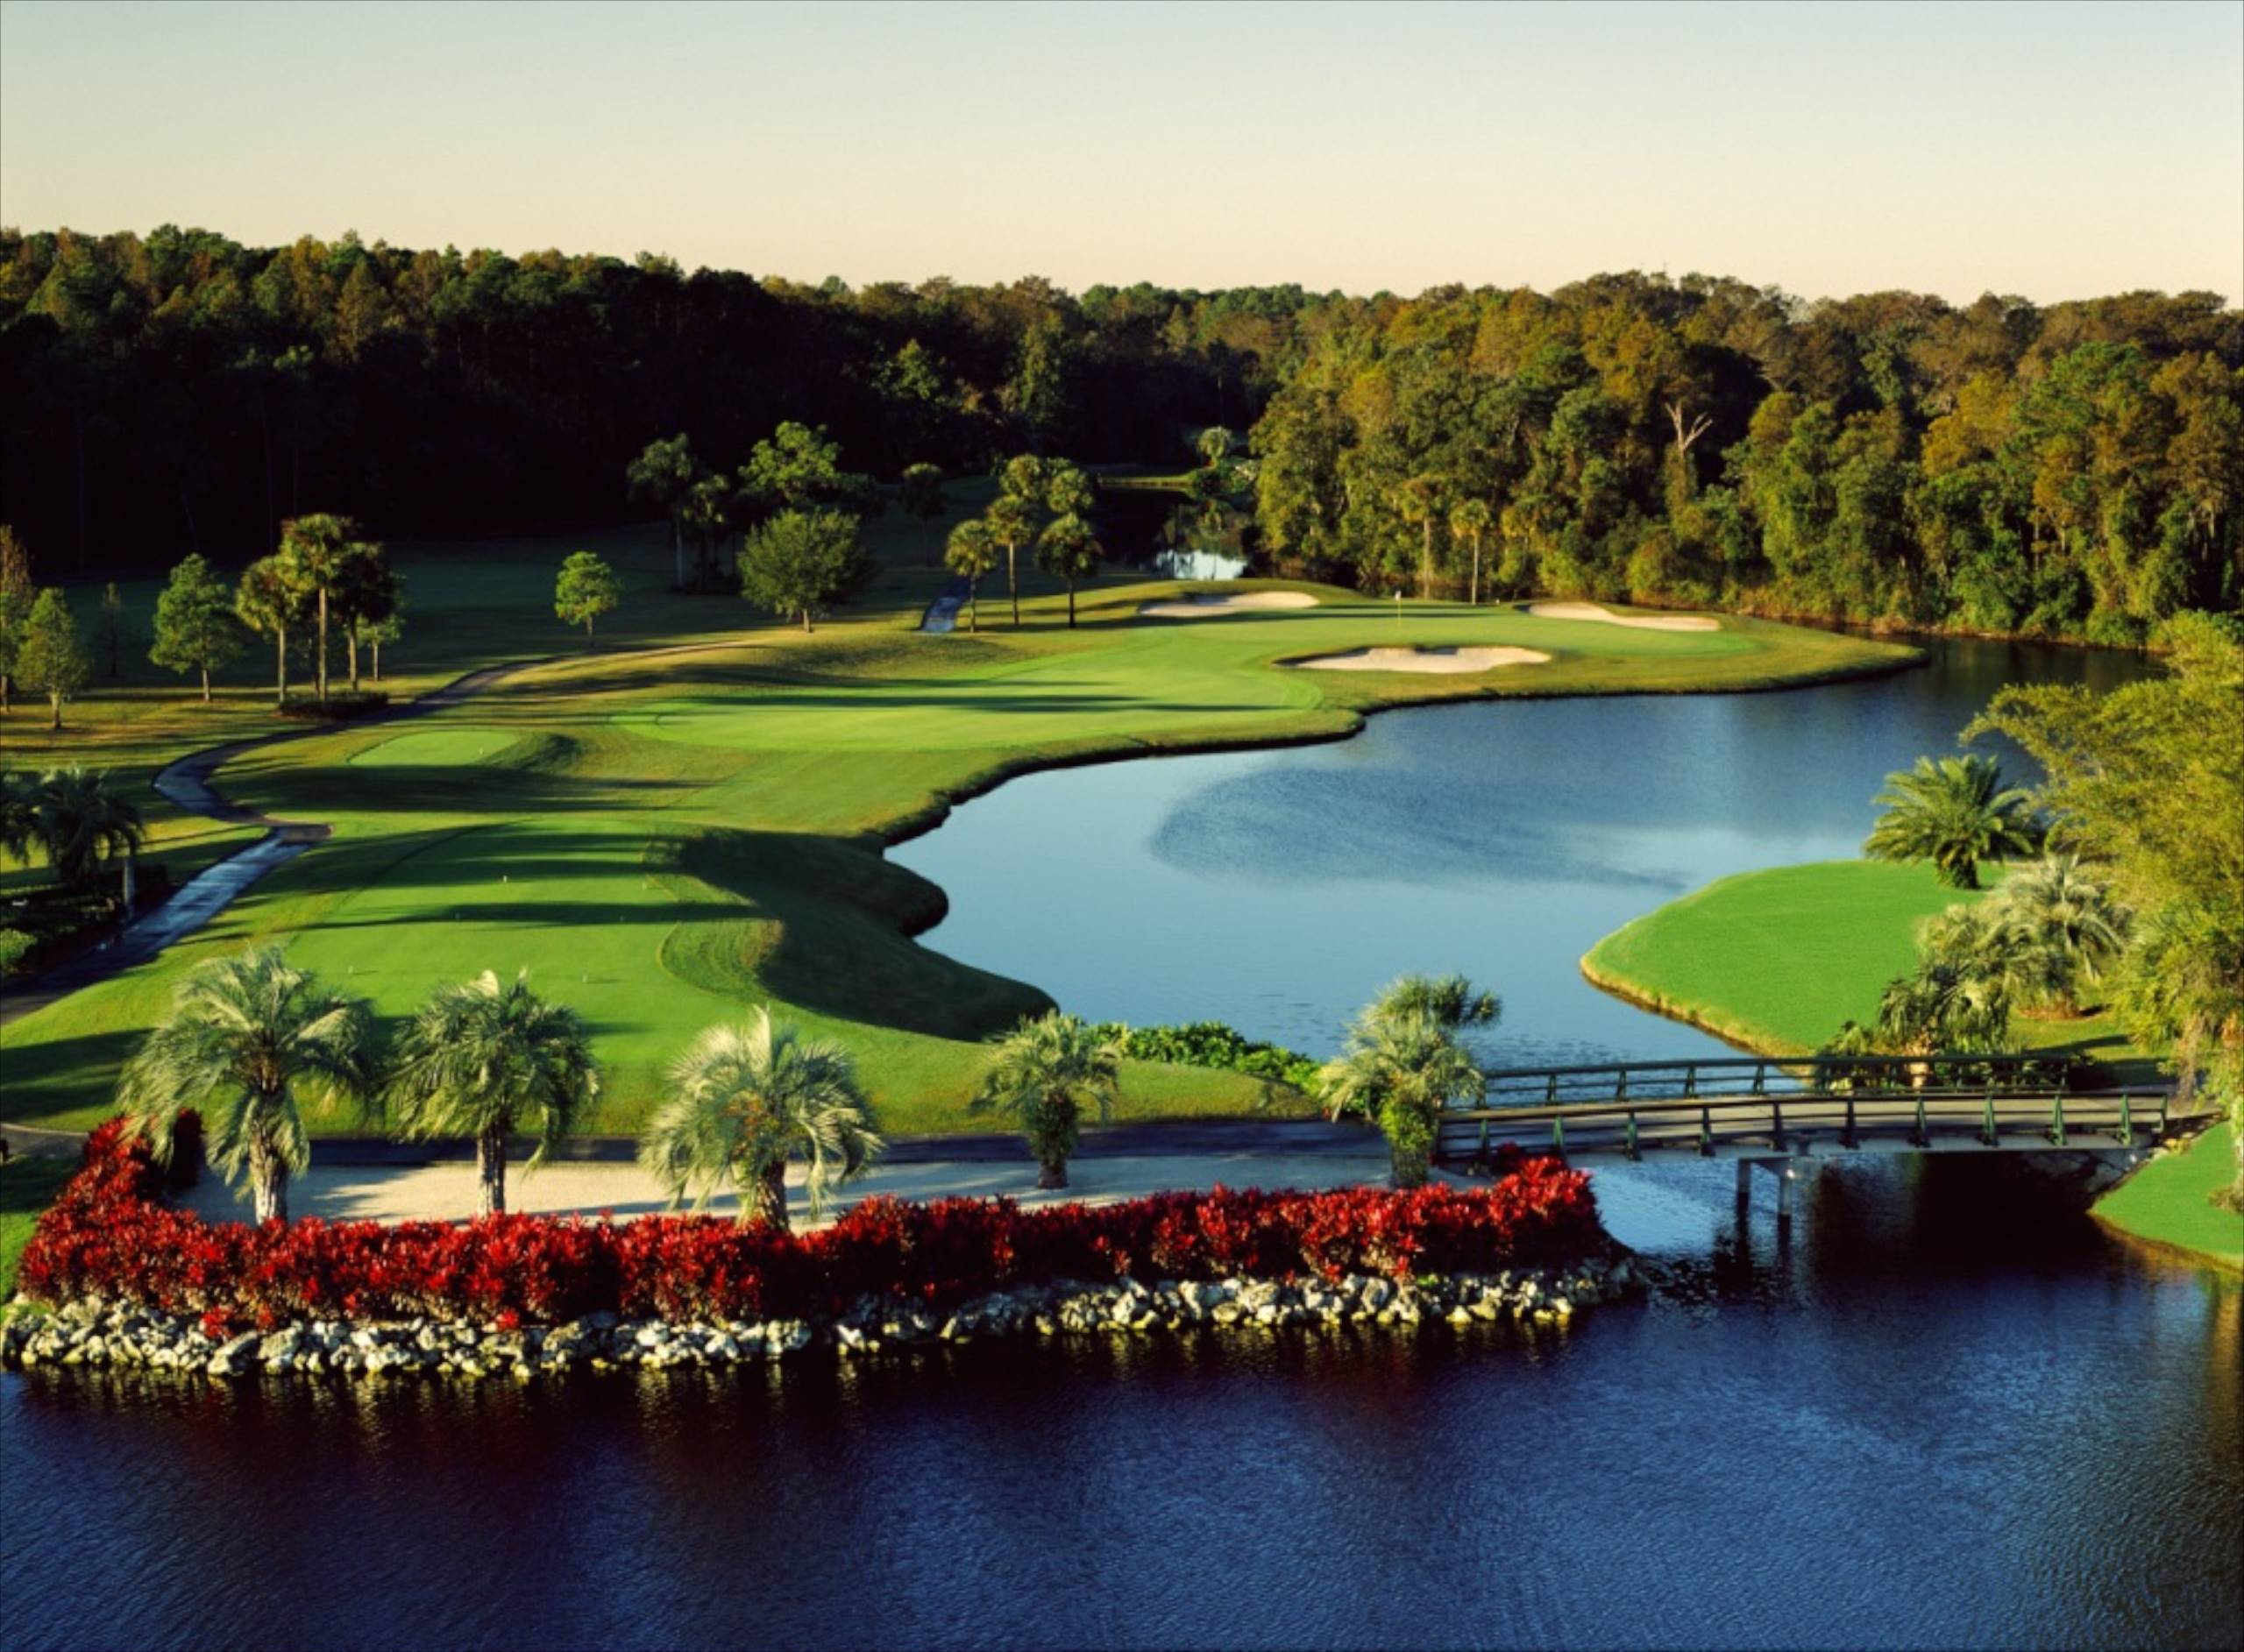 All five Disney Golf courses to be operated, managed and maintained by Arnold Palmer Golf Management